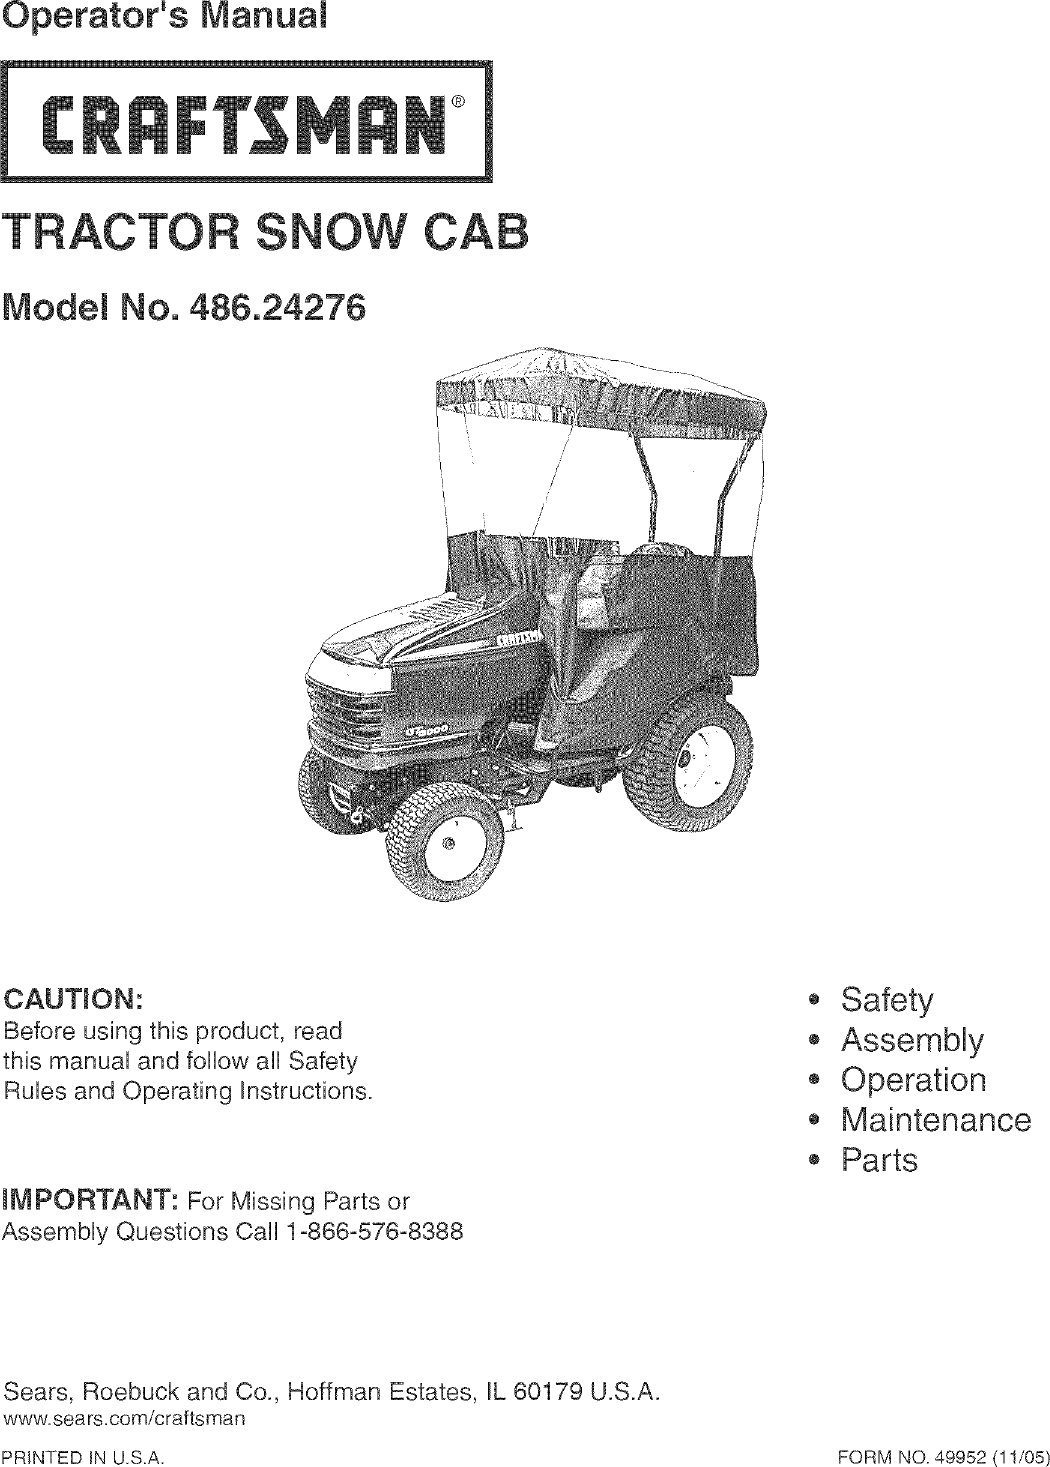 Page 1 of 12 - Craftsman Craftsman-Snow-Cab-486-24276-Owners-Manual-  Craftsman-snow-cab-486-24276-owners-manual